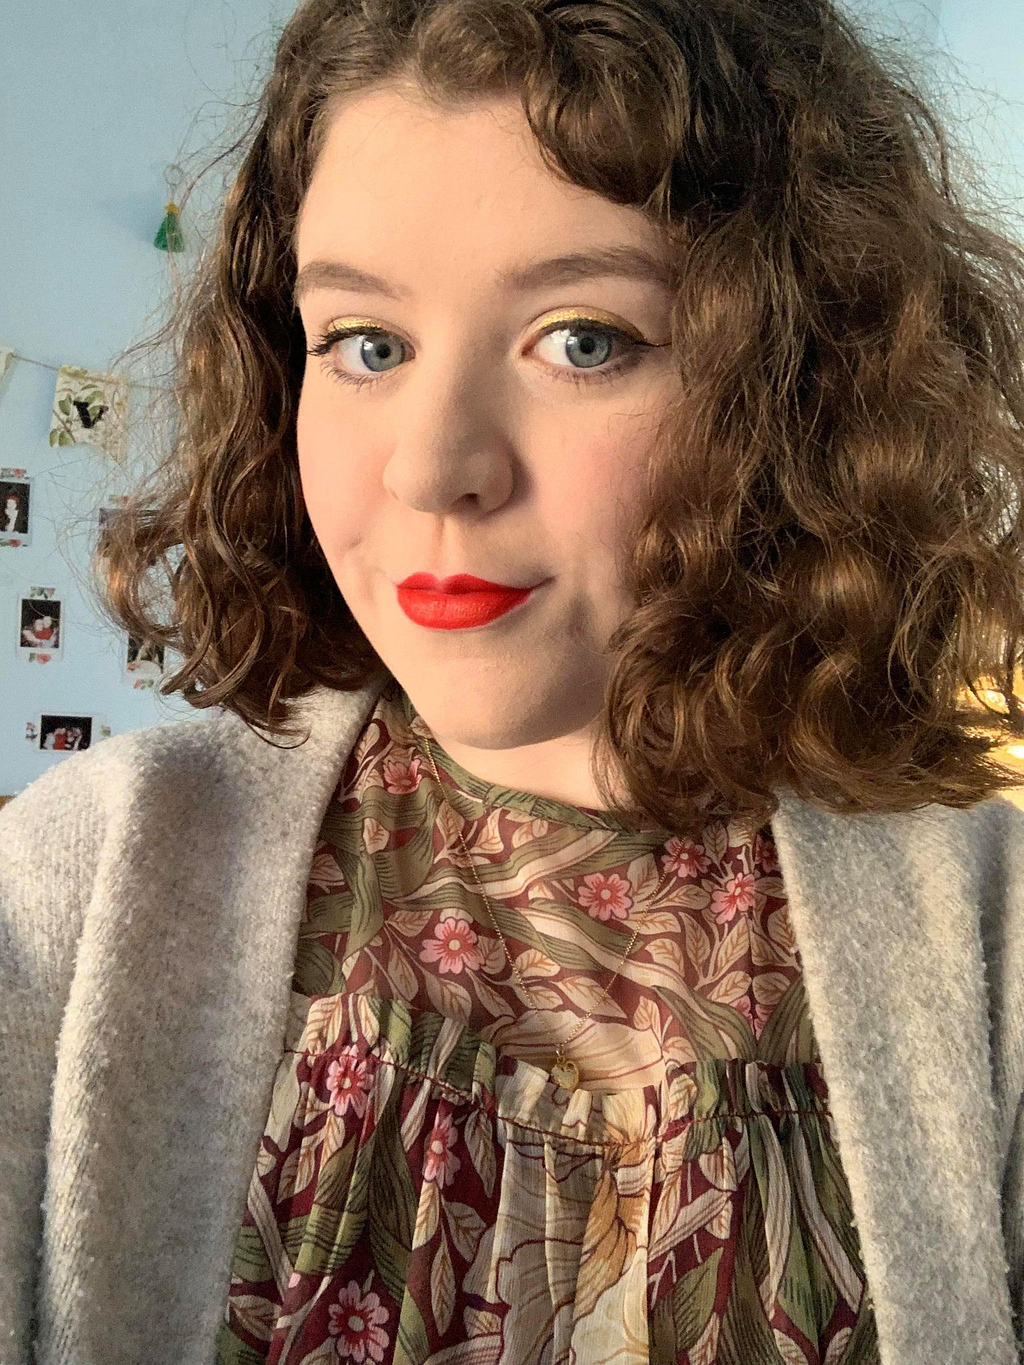 Anna is a white non-binary person with shoulder-length brown hair. She wears lipstick, a patterned blouse and grey cardigan.